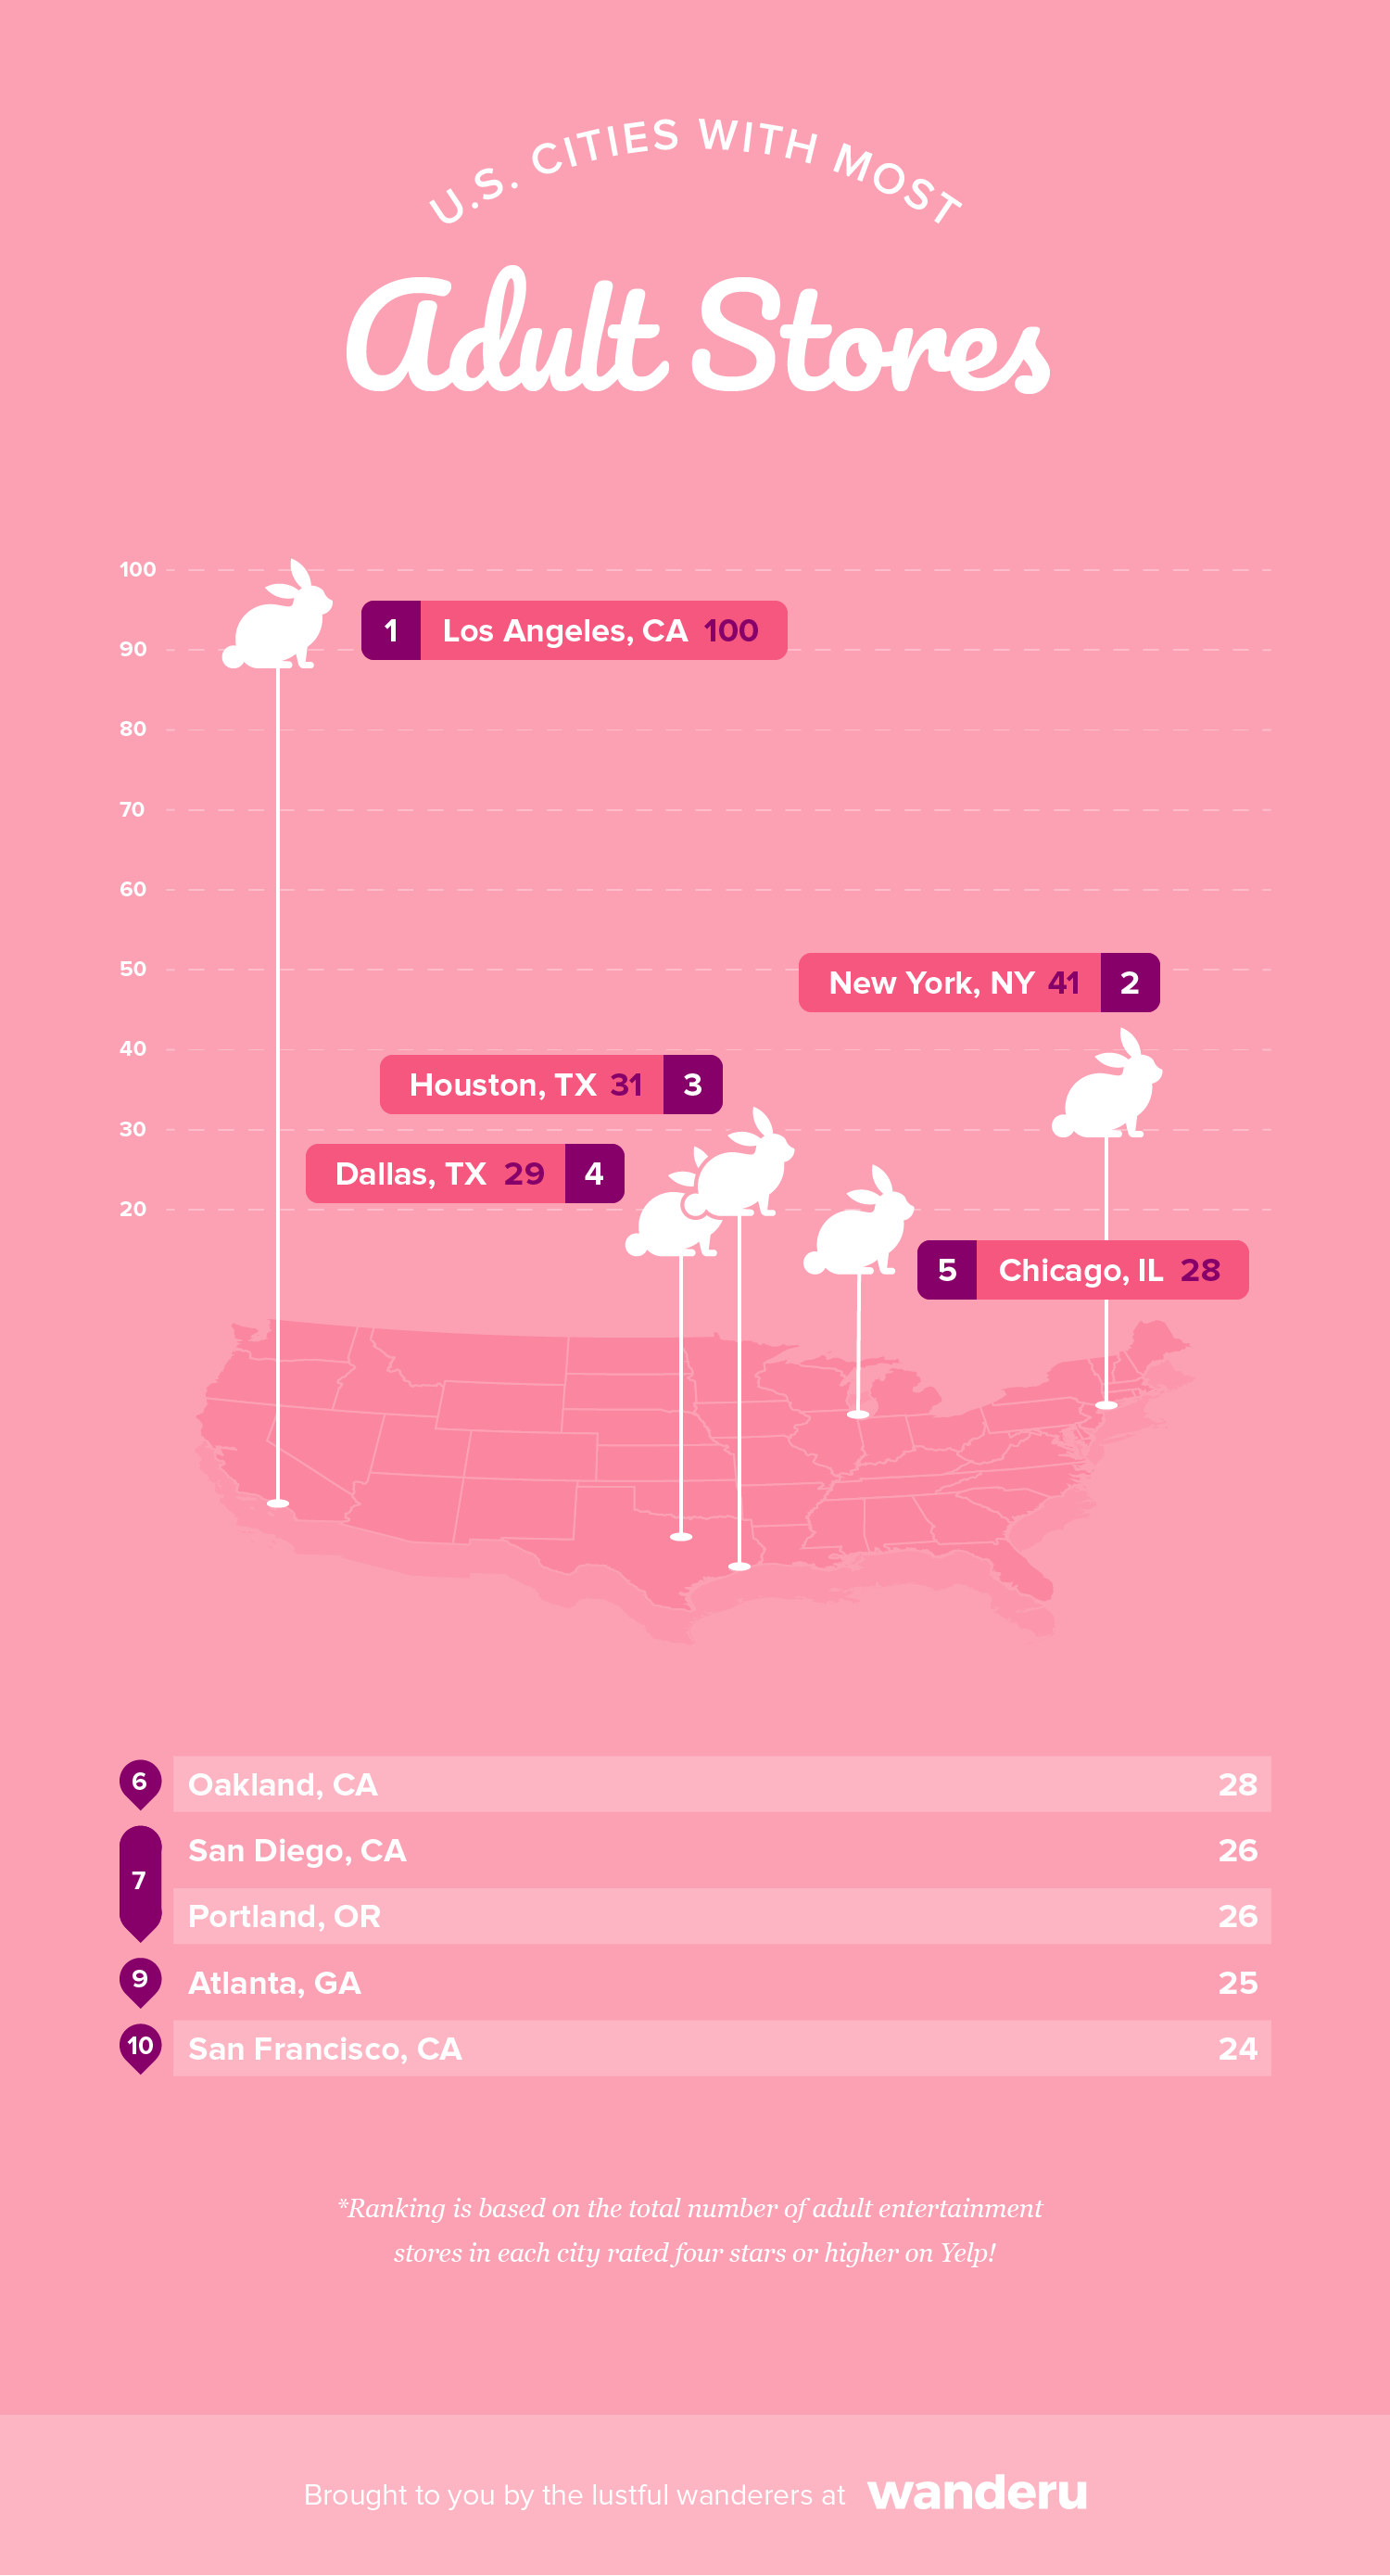 Graphic lists the top 10 U.S. cities with the most adult entertainment stores.